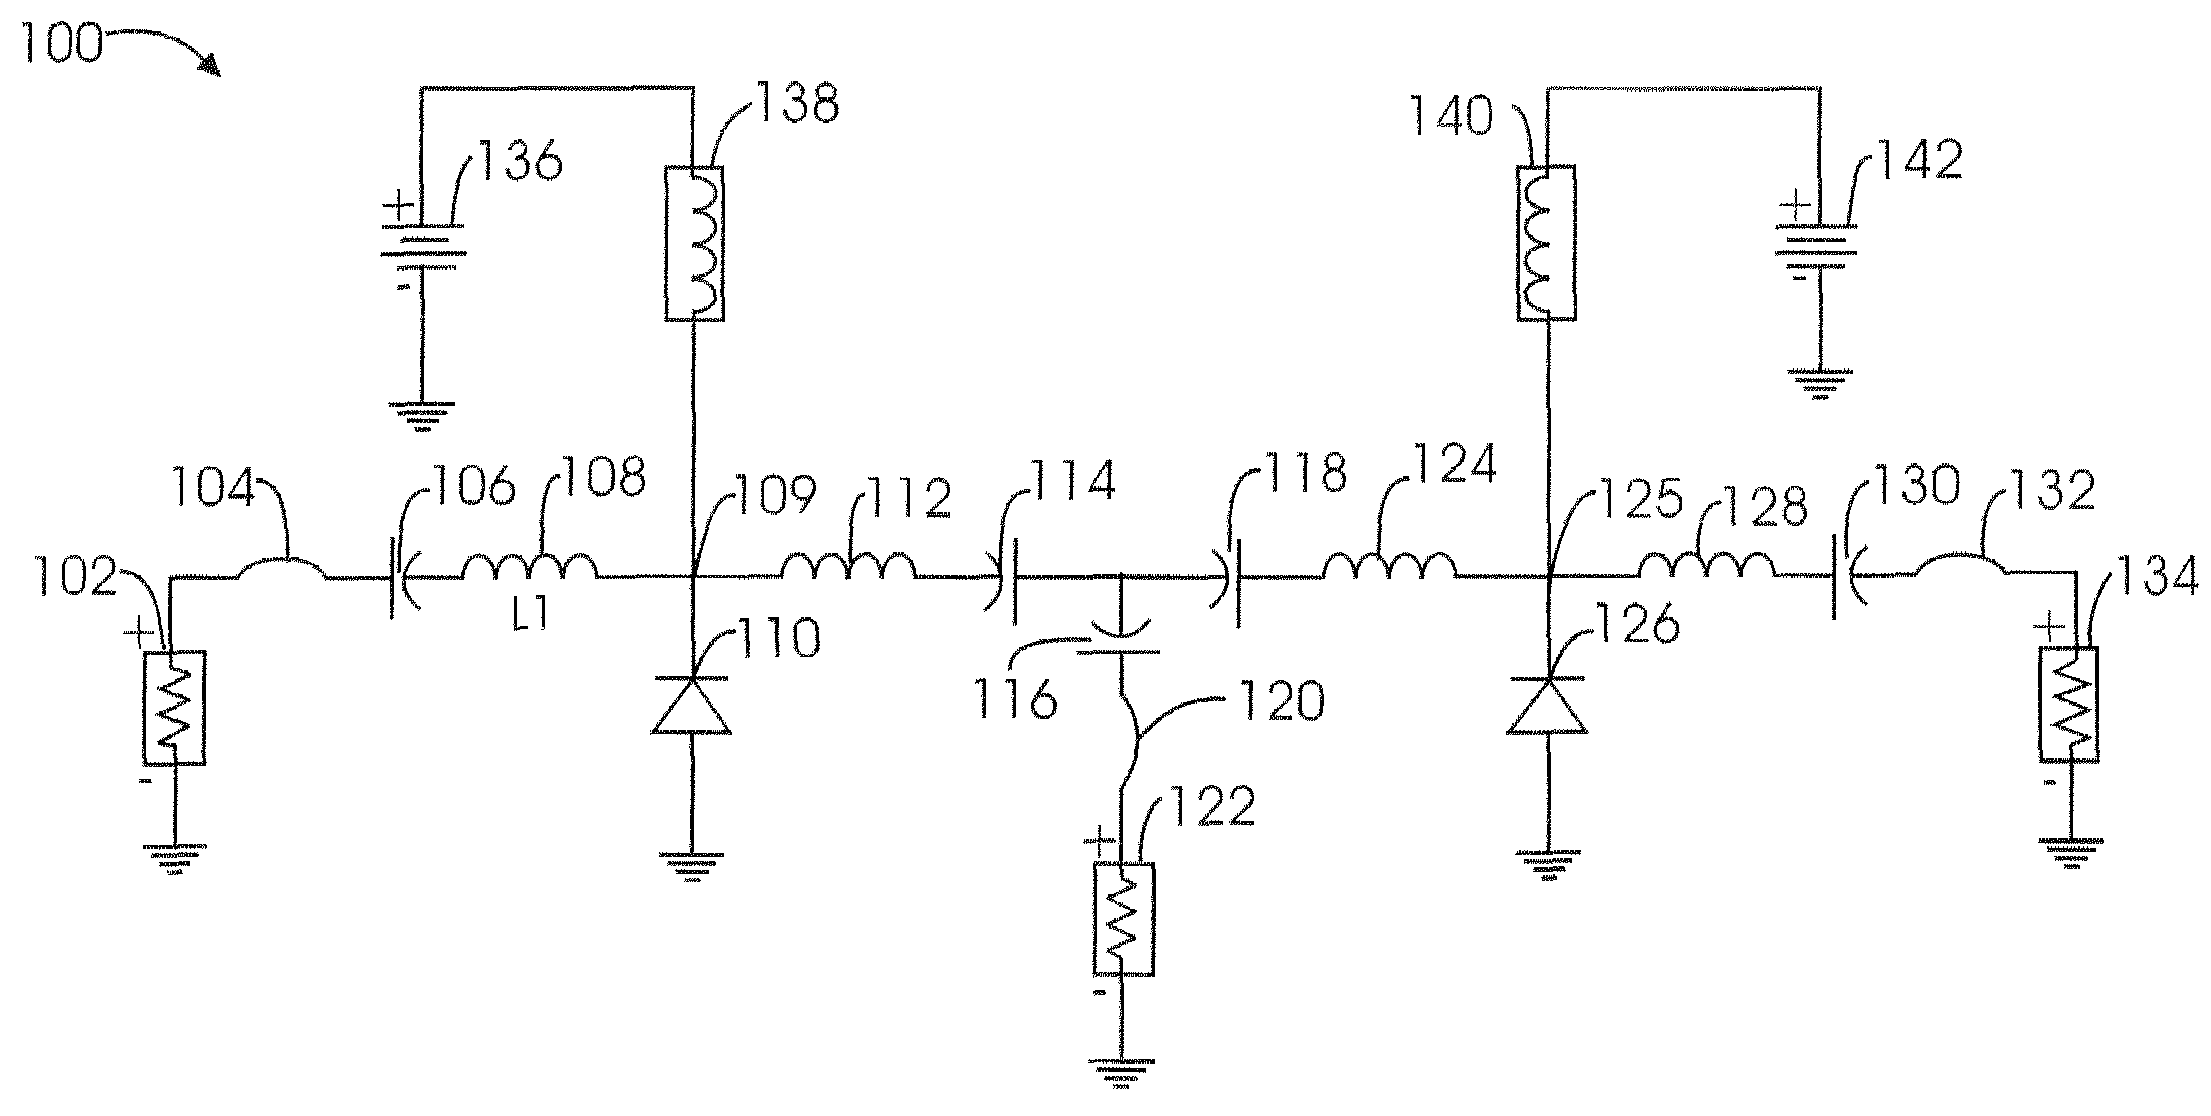 Method to improve characteristics of pin diode switches, attenuators, and limiters by control of nodal signal voltage amplitude